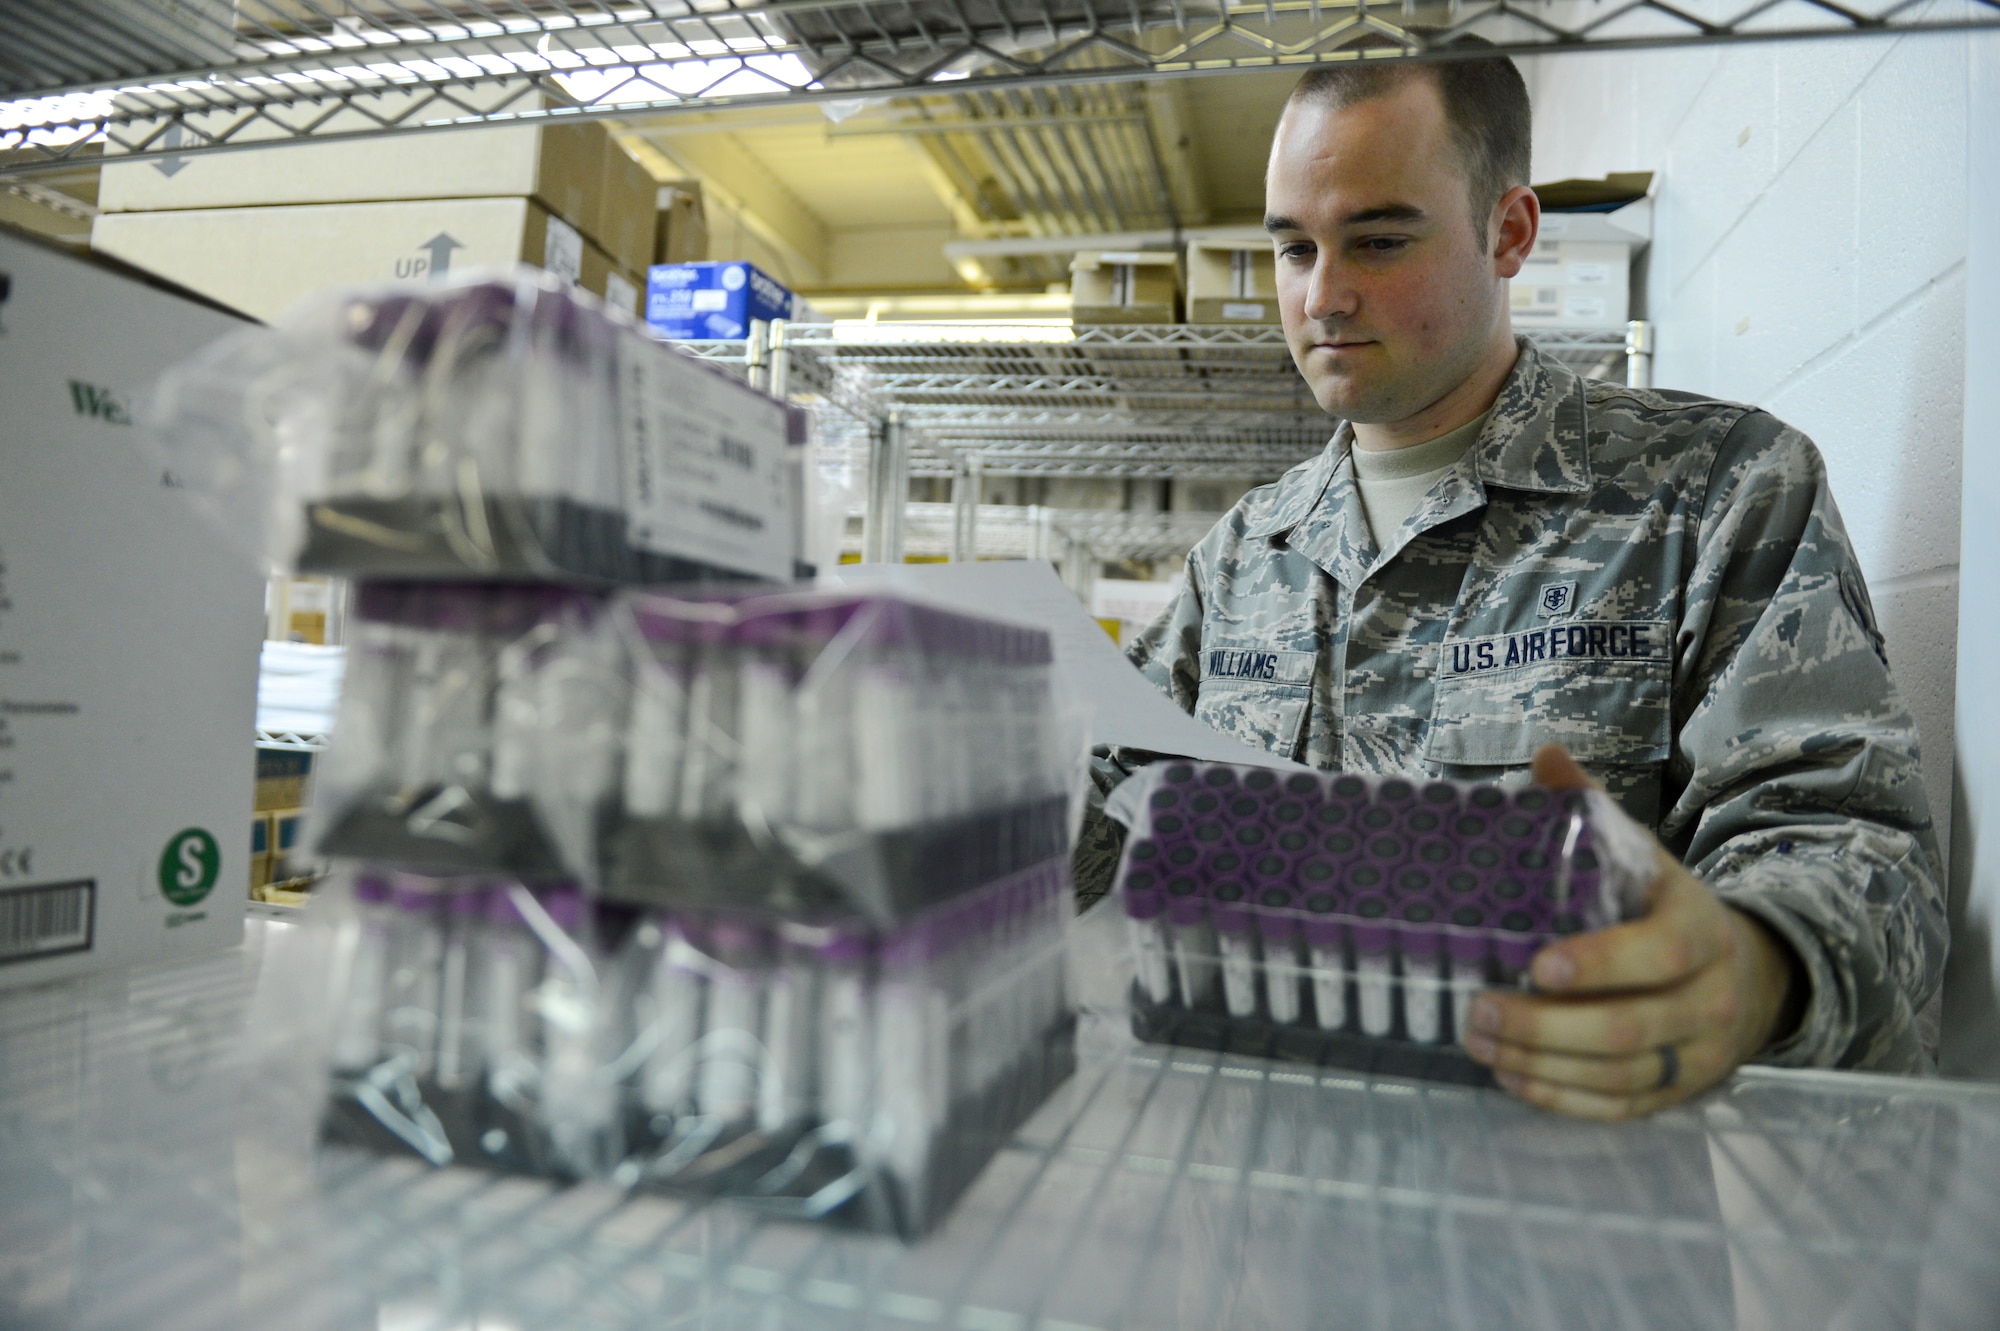 Airman 1st Class Jordan Williams, 2nd Medical Support Squadron Medical Logistics, takes inventory of vacuum tubes on Barksdale Air Force Base, La., May 21, 2013. Inventory is conducted to keep track of incoming and outgoing supplies. (U.S. Air Force photo/Senior Airman Micaiah Anthony)